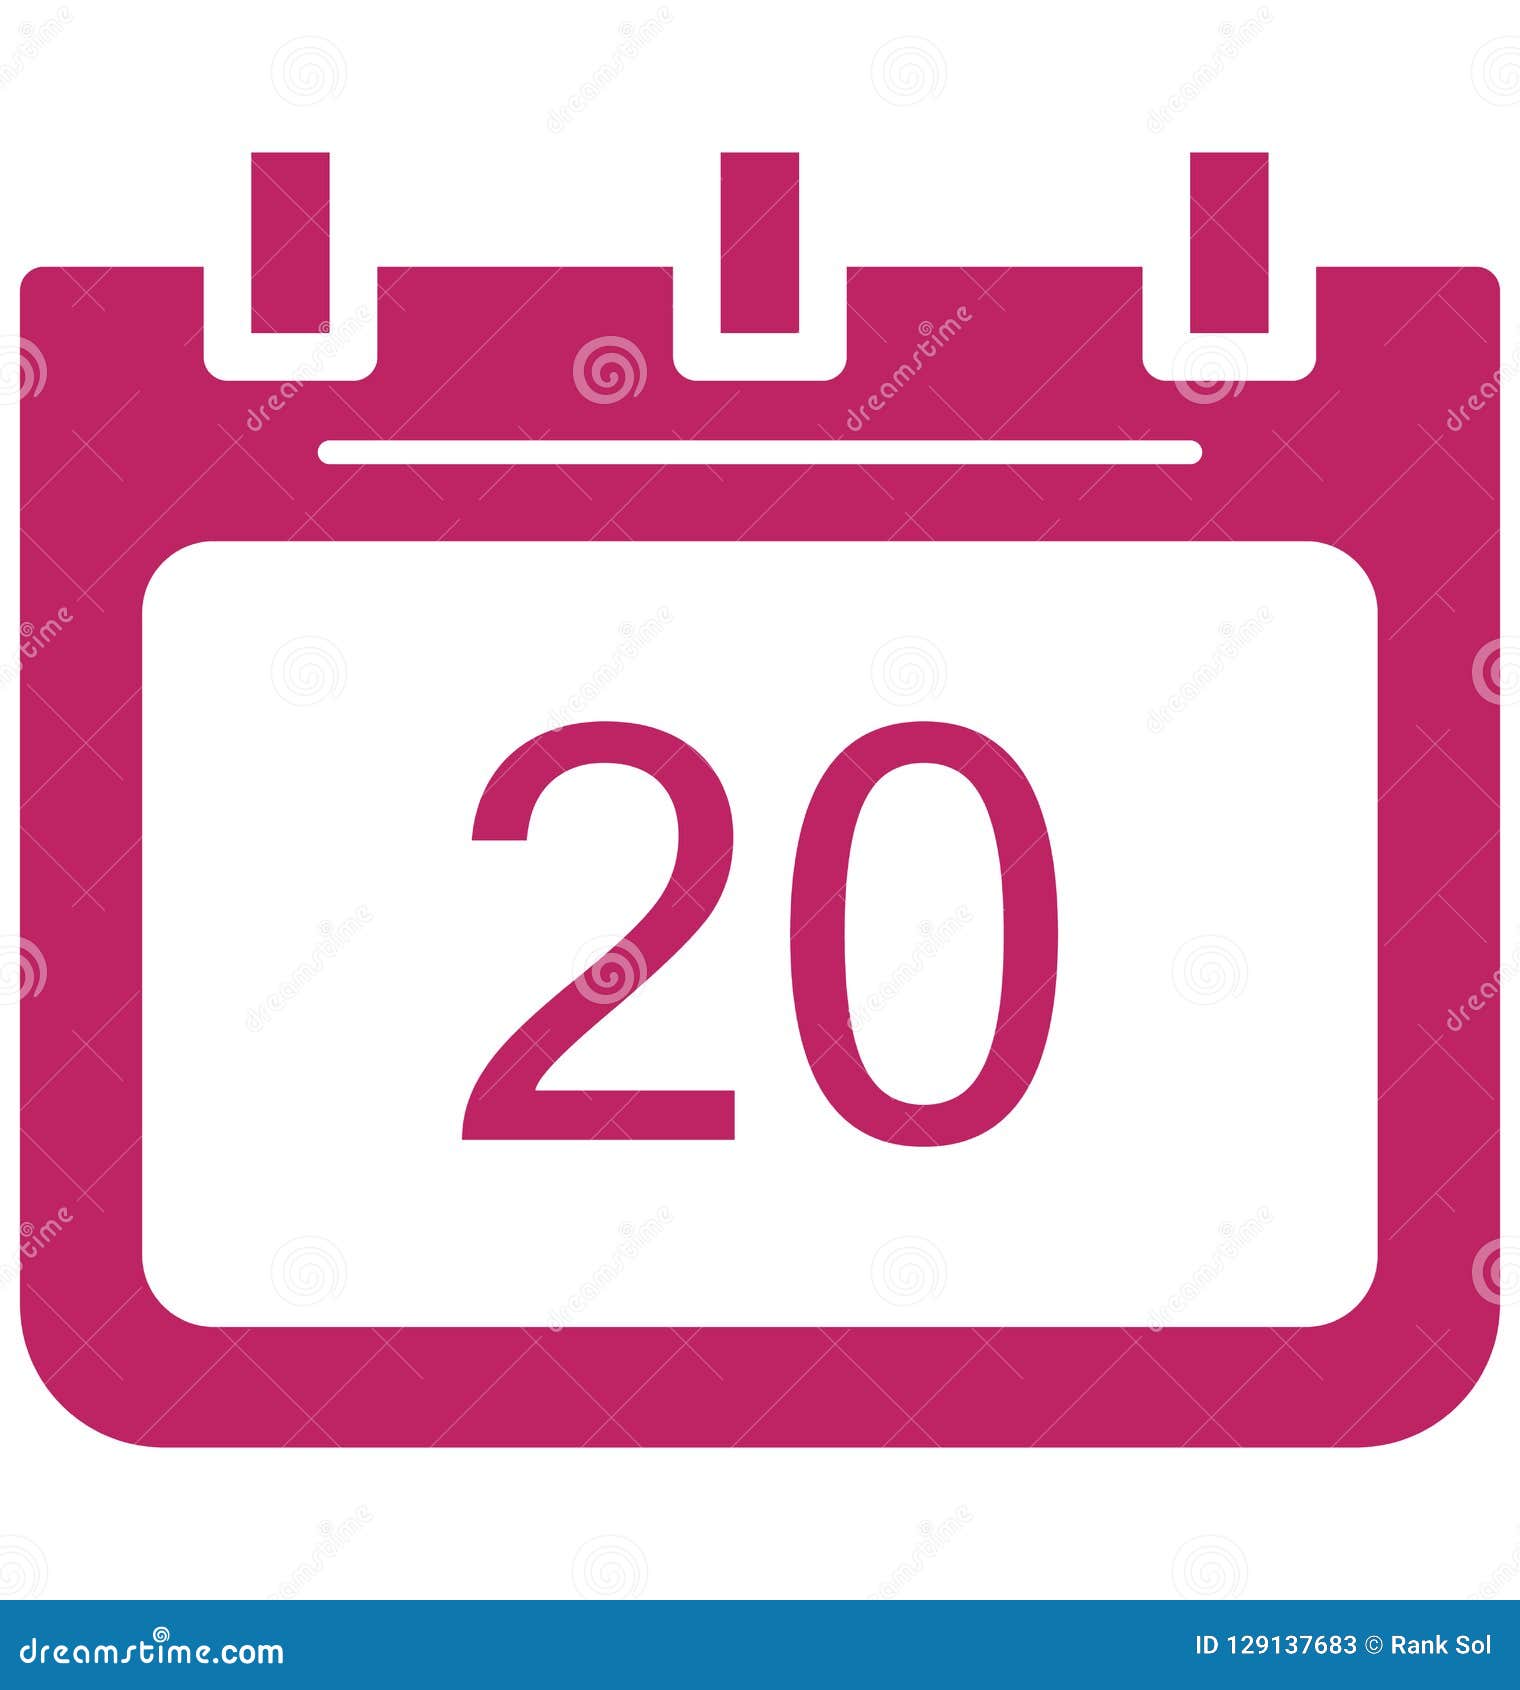 twenty, 20 special event day  icon that can be easily modified or edit.